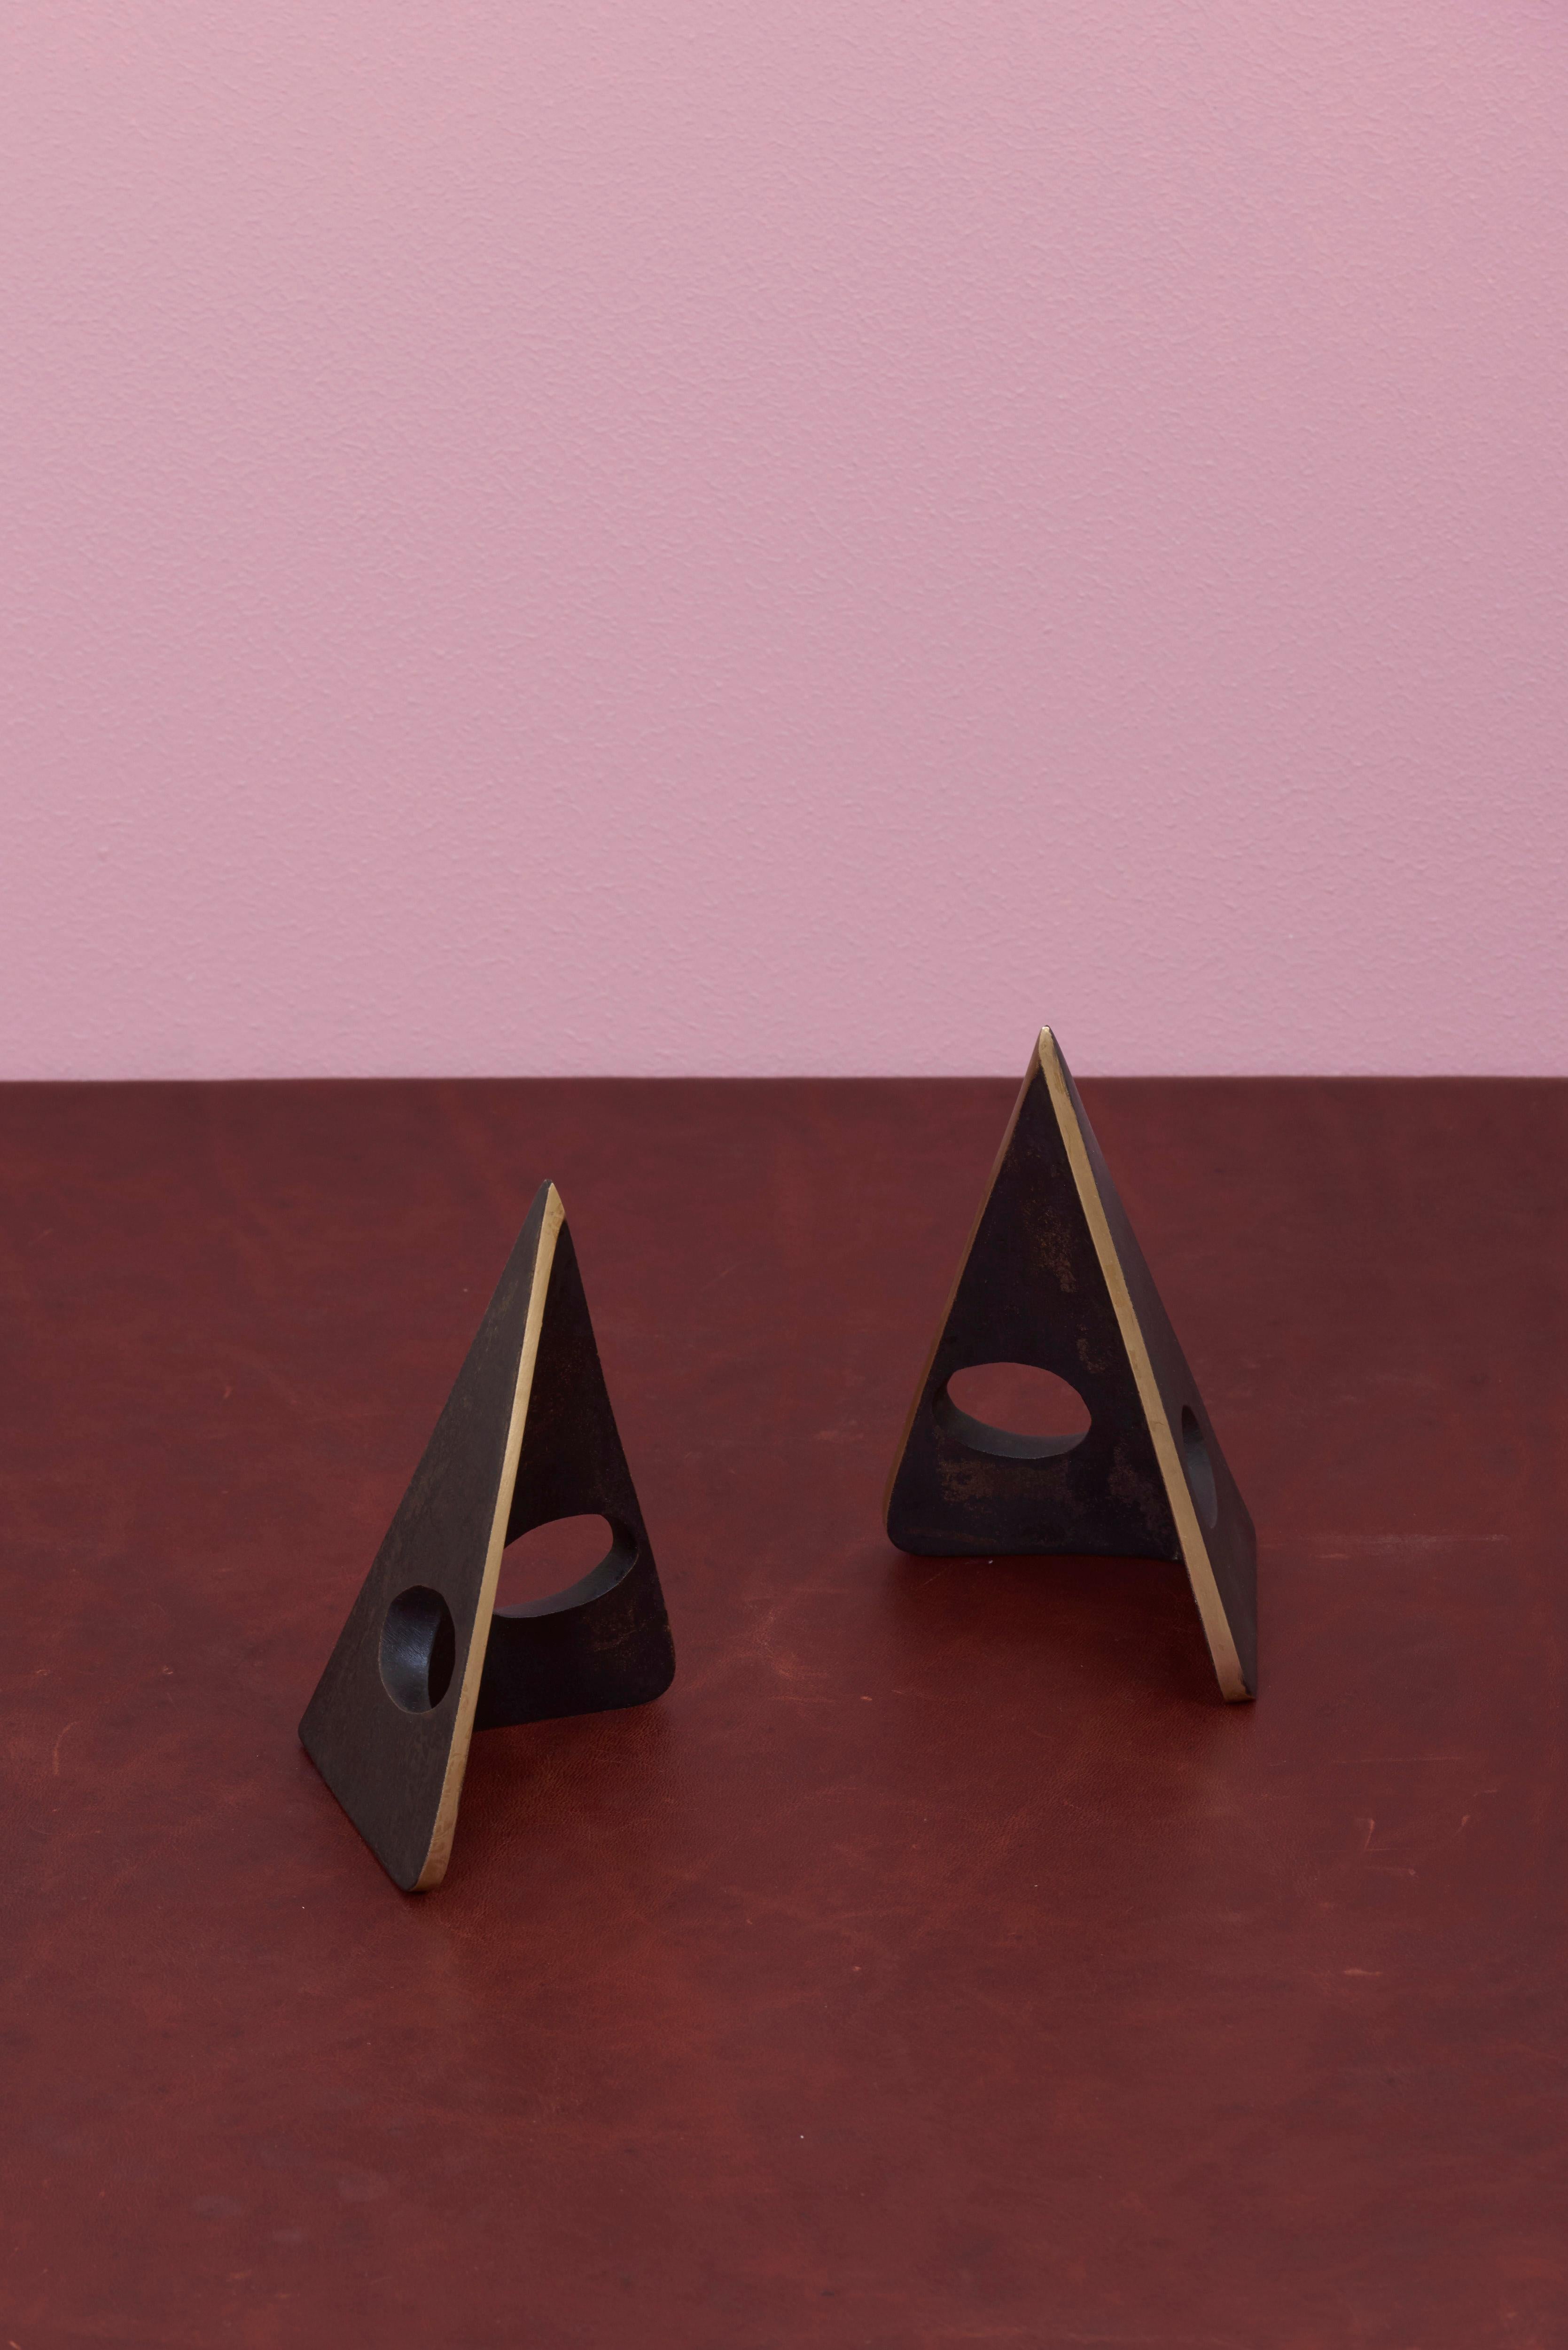 Mid-Century Modern Pair of Carl Auböck Bookends #4100 in a Patina and Polish Brass Mix For Sale